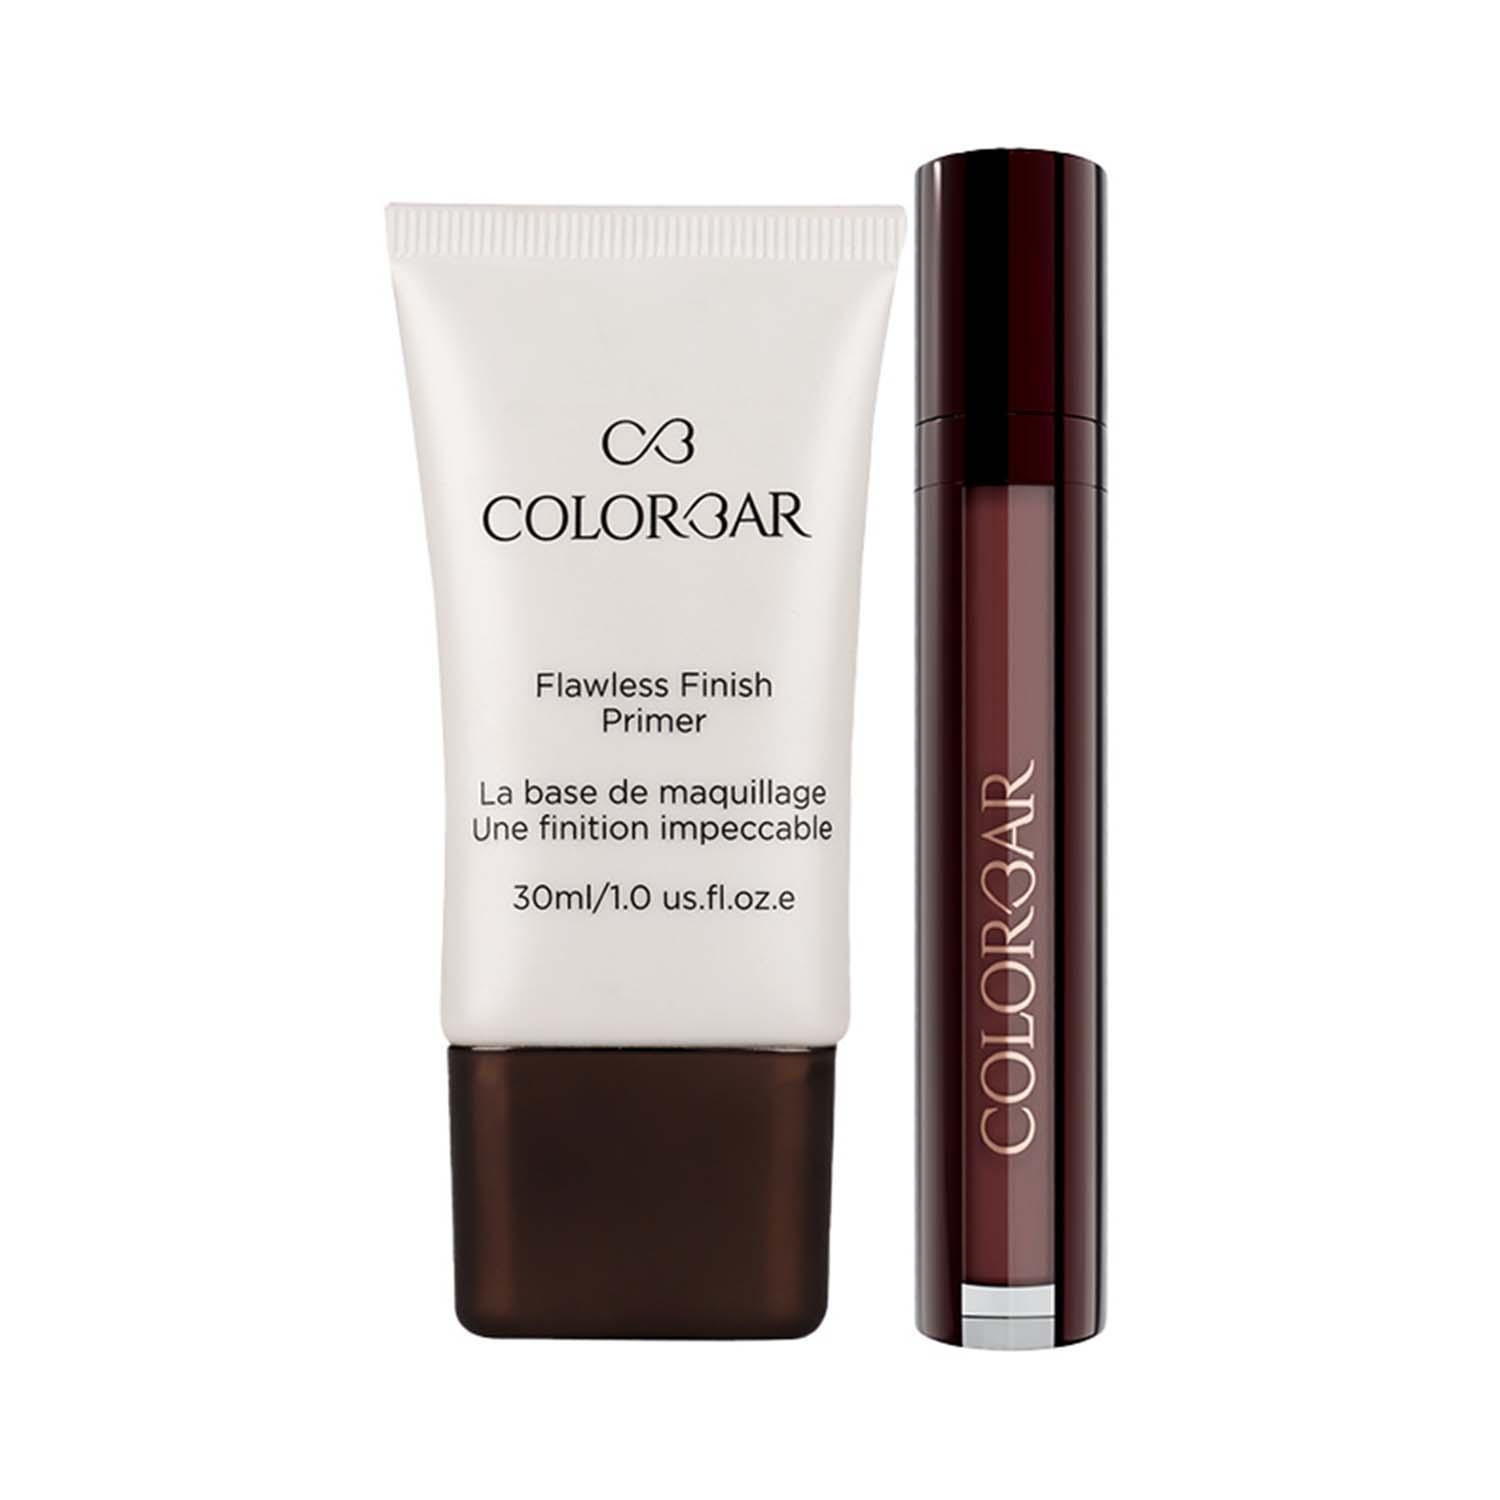 Colorbar Flawless Finish Primer + Kissproof Lipstain - Haute Latte 007 Combo